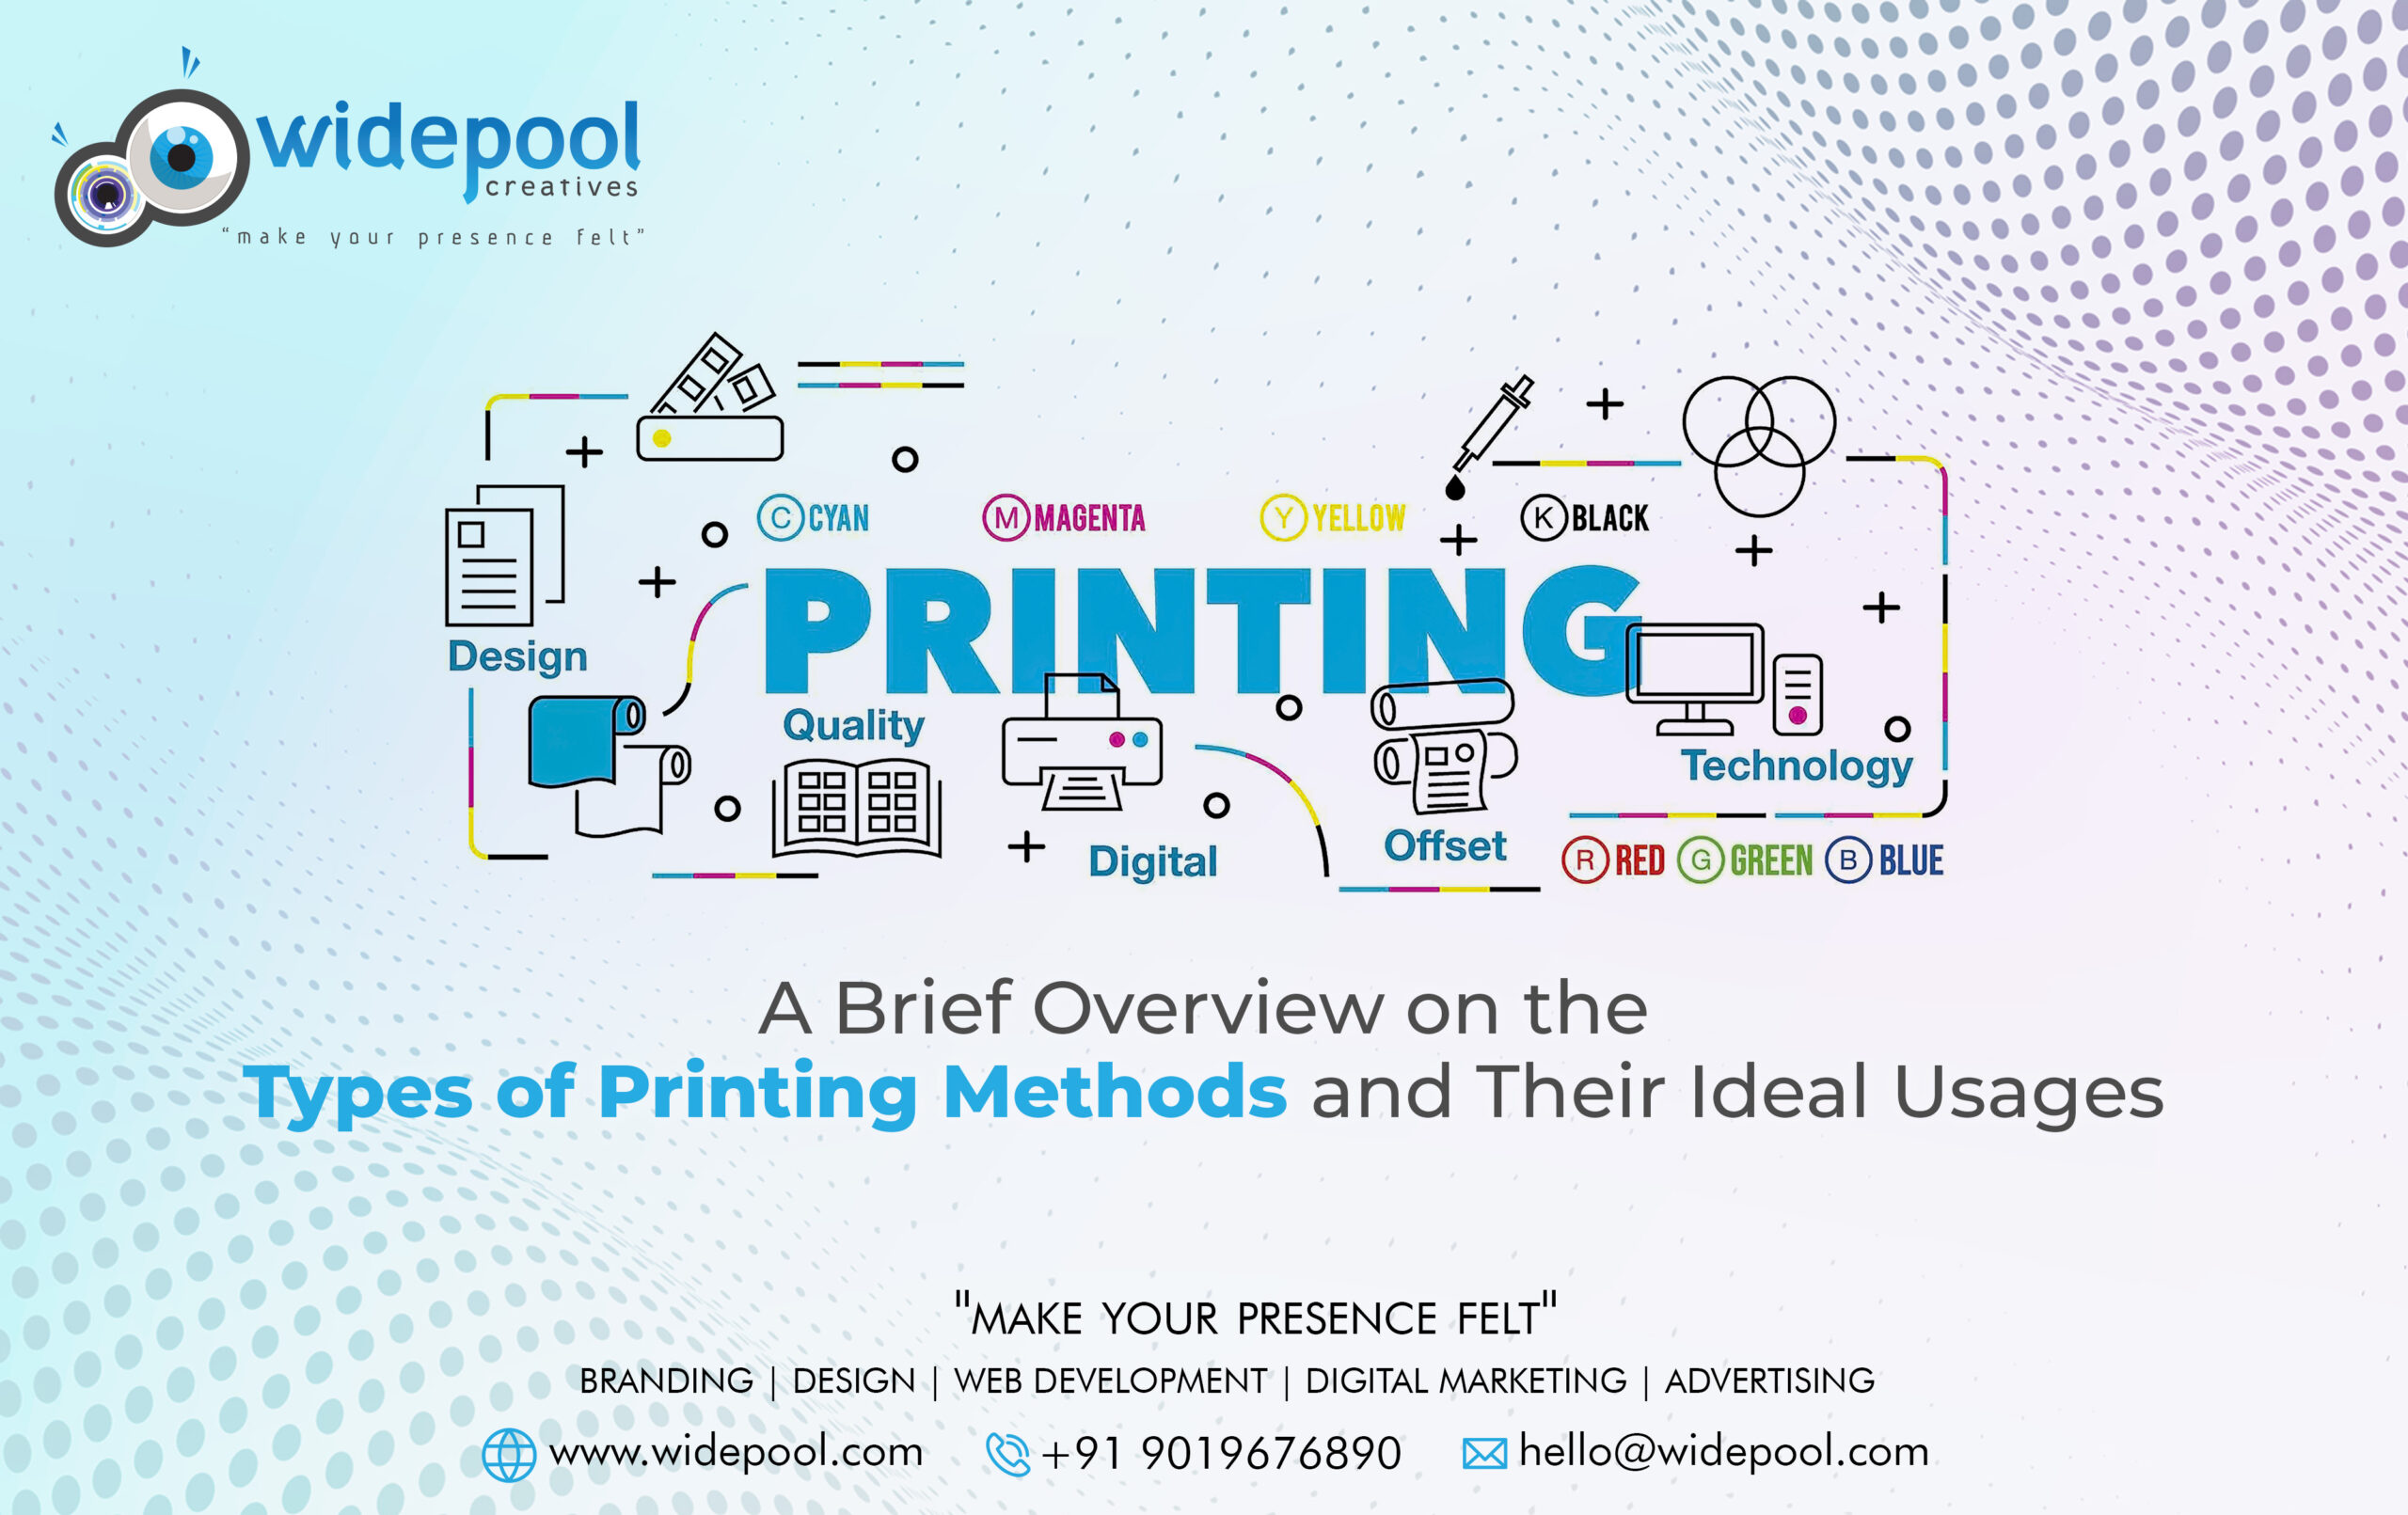 A Brief Overview on the Types of Printing Methods and Their Ideal Usages